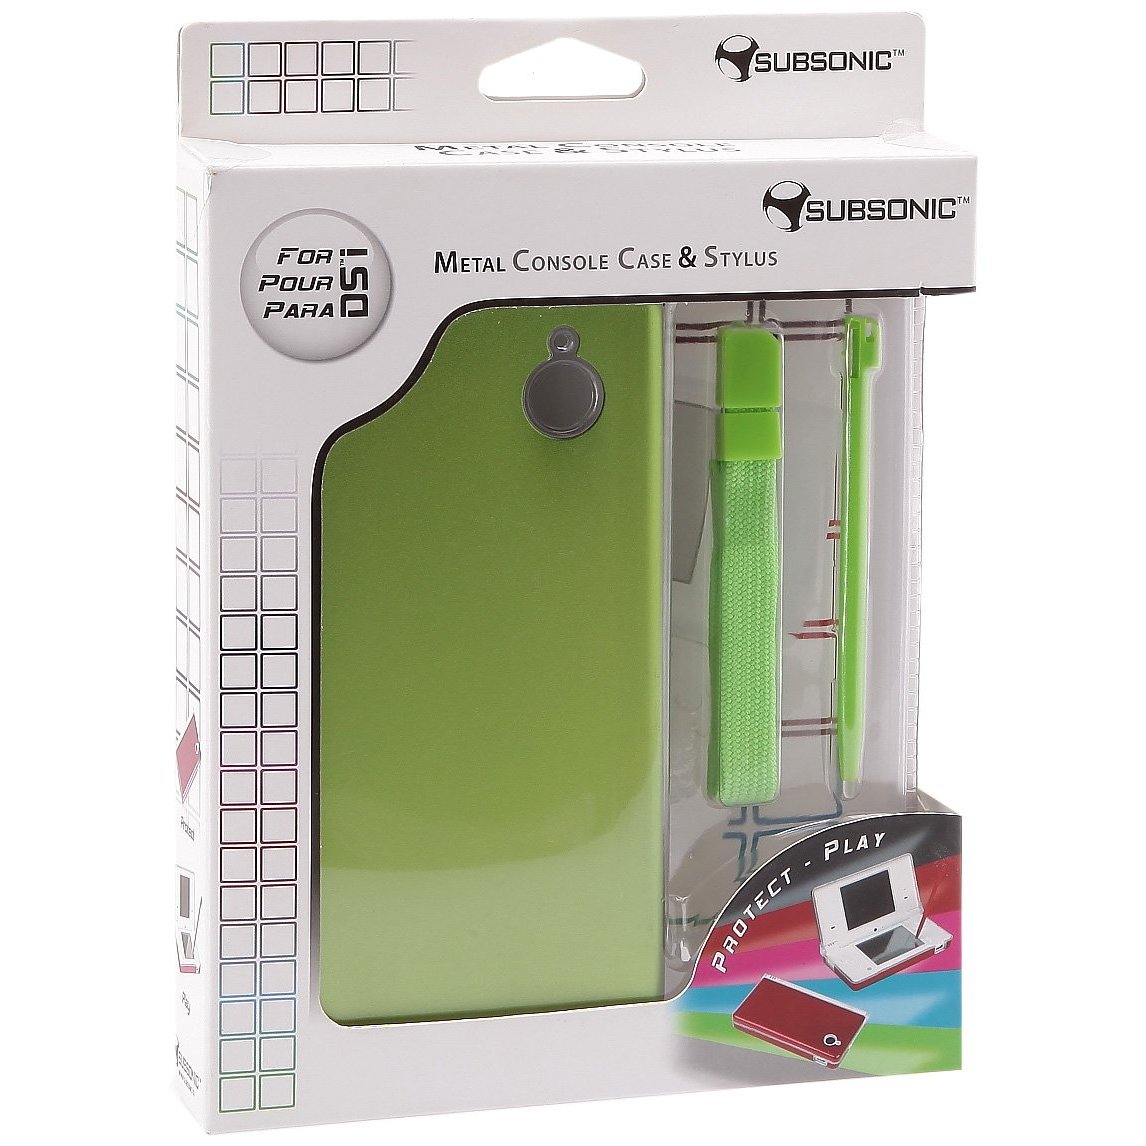 Subsonic DSi Metal Console Case and Stylus